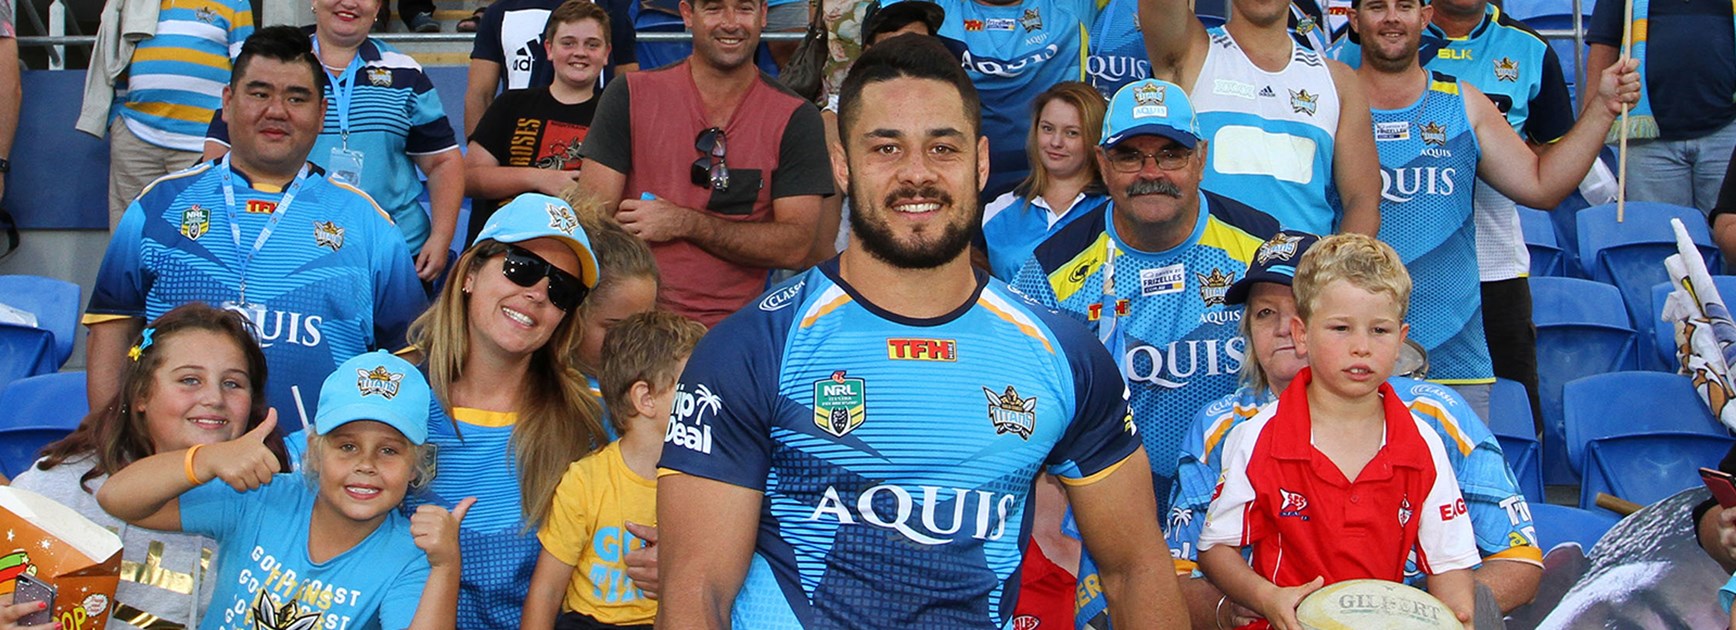 Jarryd Hayne has extended his contract with the Gold Coast Titans.